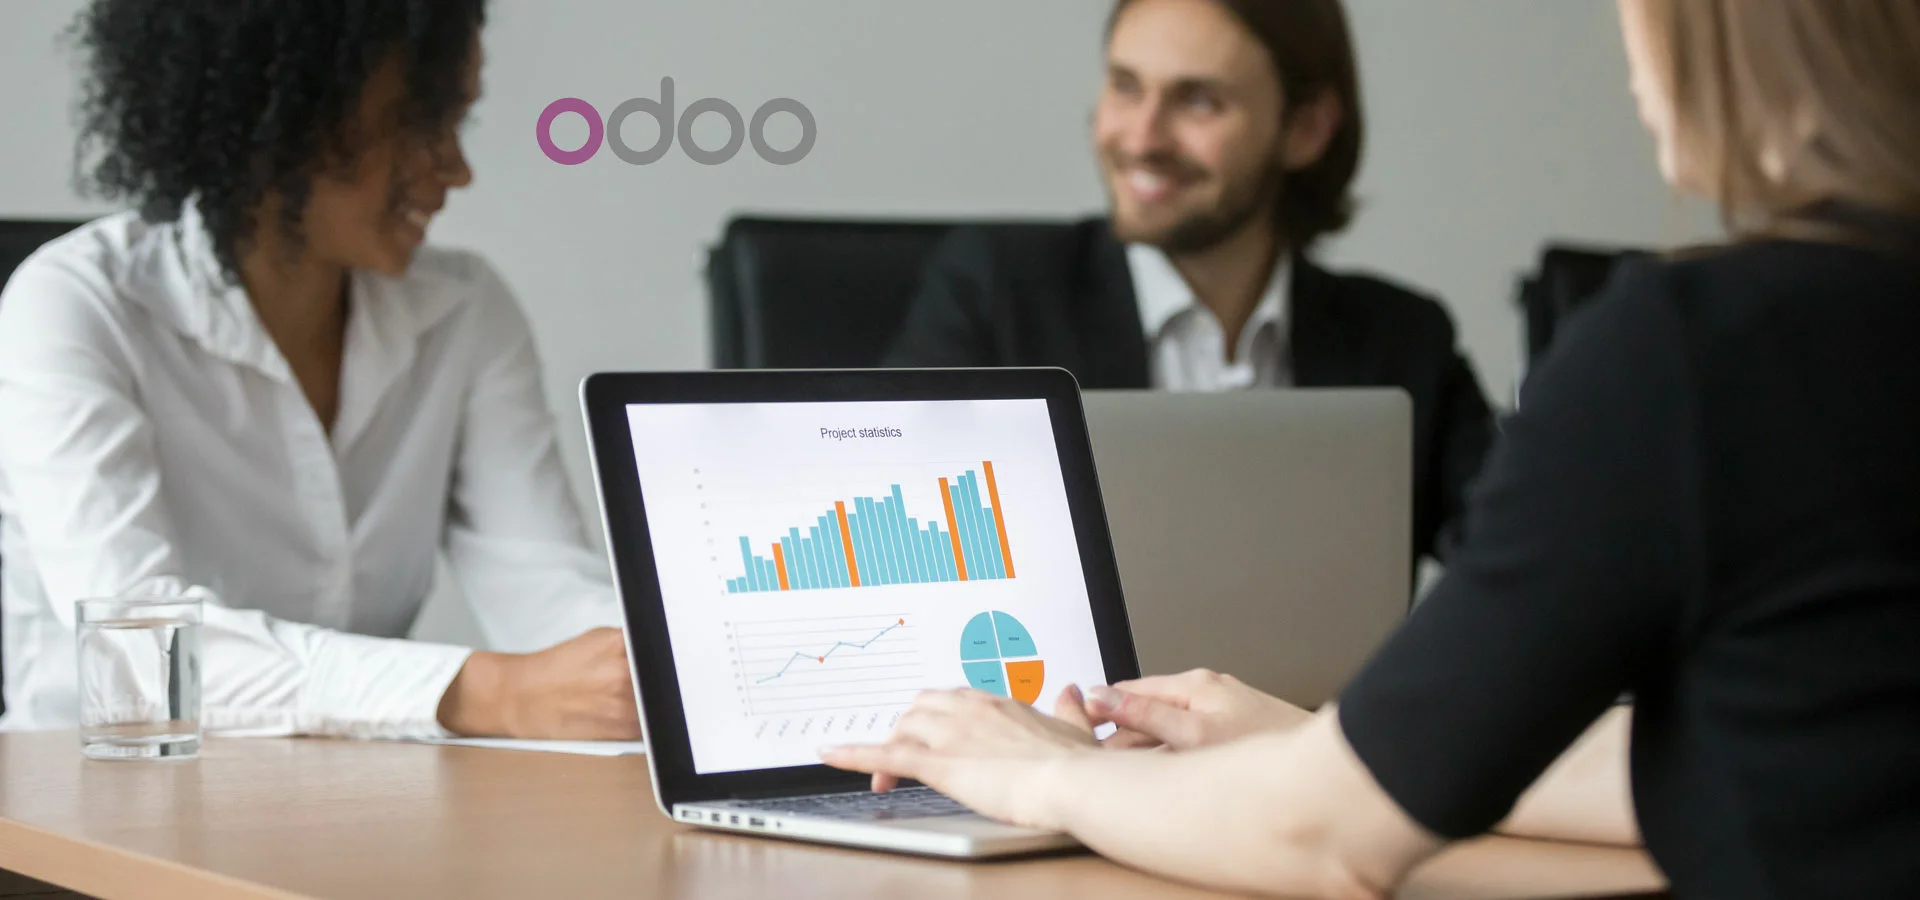 odoo-erp-support-and-services-related-blog-104